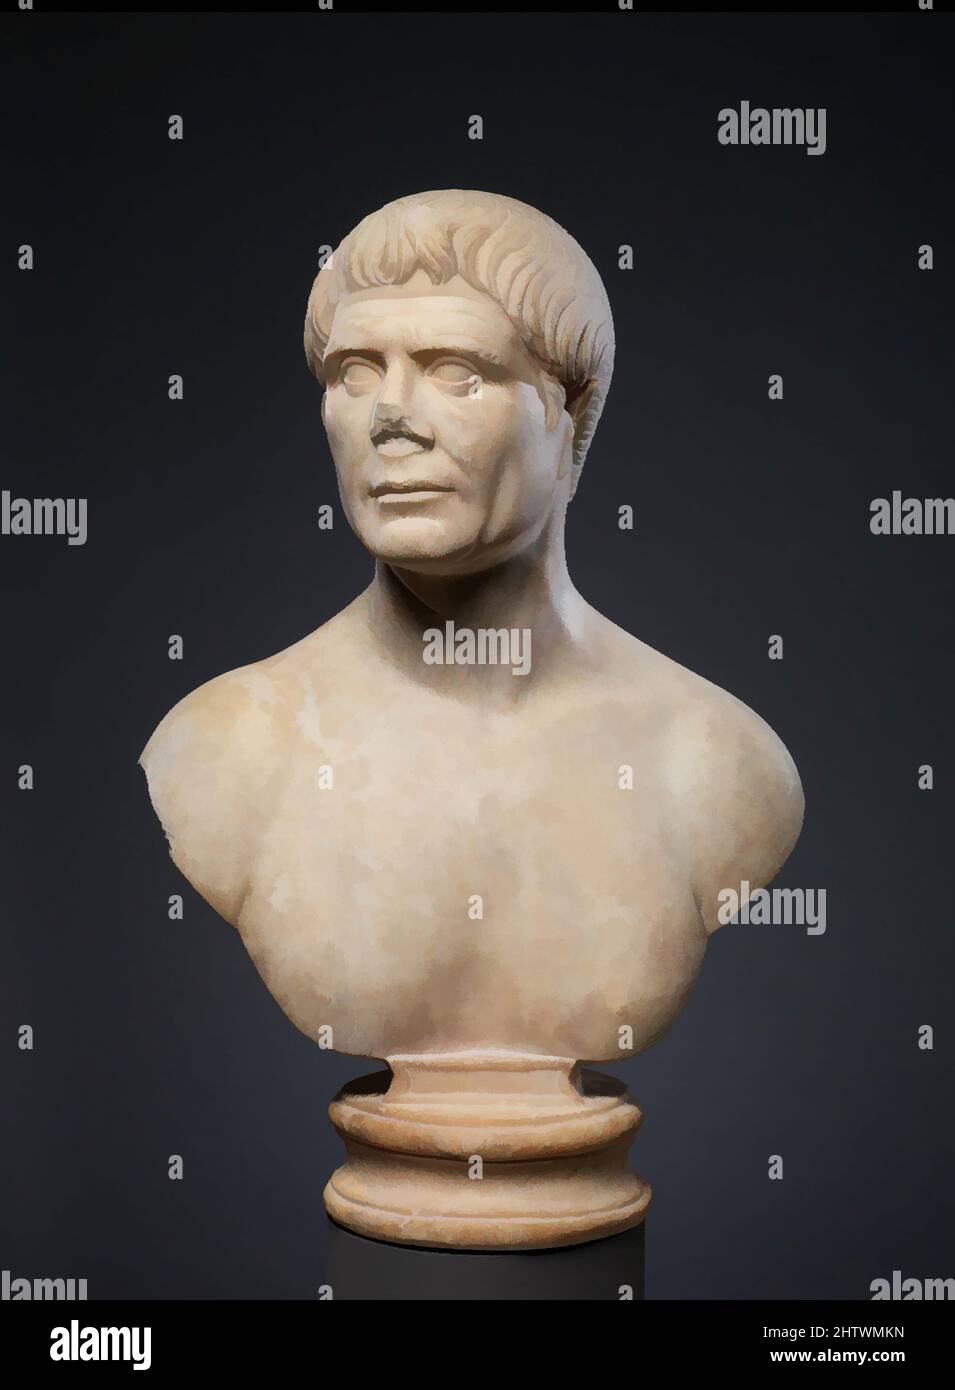 Art inspired by Marble portrait bust of a man, Trajanic, ca. A.D. 110–120, Roman, Marble, H. 24 5/8 in. (62.5 cm), Stone Sculpture, This man’s resolute expression and the simple yet studied arrangement of locks at his forehead bring to mind official portraits of the emperor Trajan (r, Classic works modernized by Artotop with a splash of modernity. Shapes, color and value, eye-catching visual impact on art. Emotions through freedom of artworks in a contemporary way. A timeless message pursuing a wildly creative new direction. Artists turning to the digital medium and creating the Artotop NFT Stock Photo